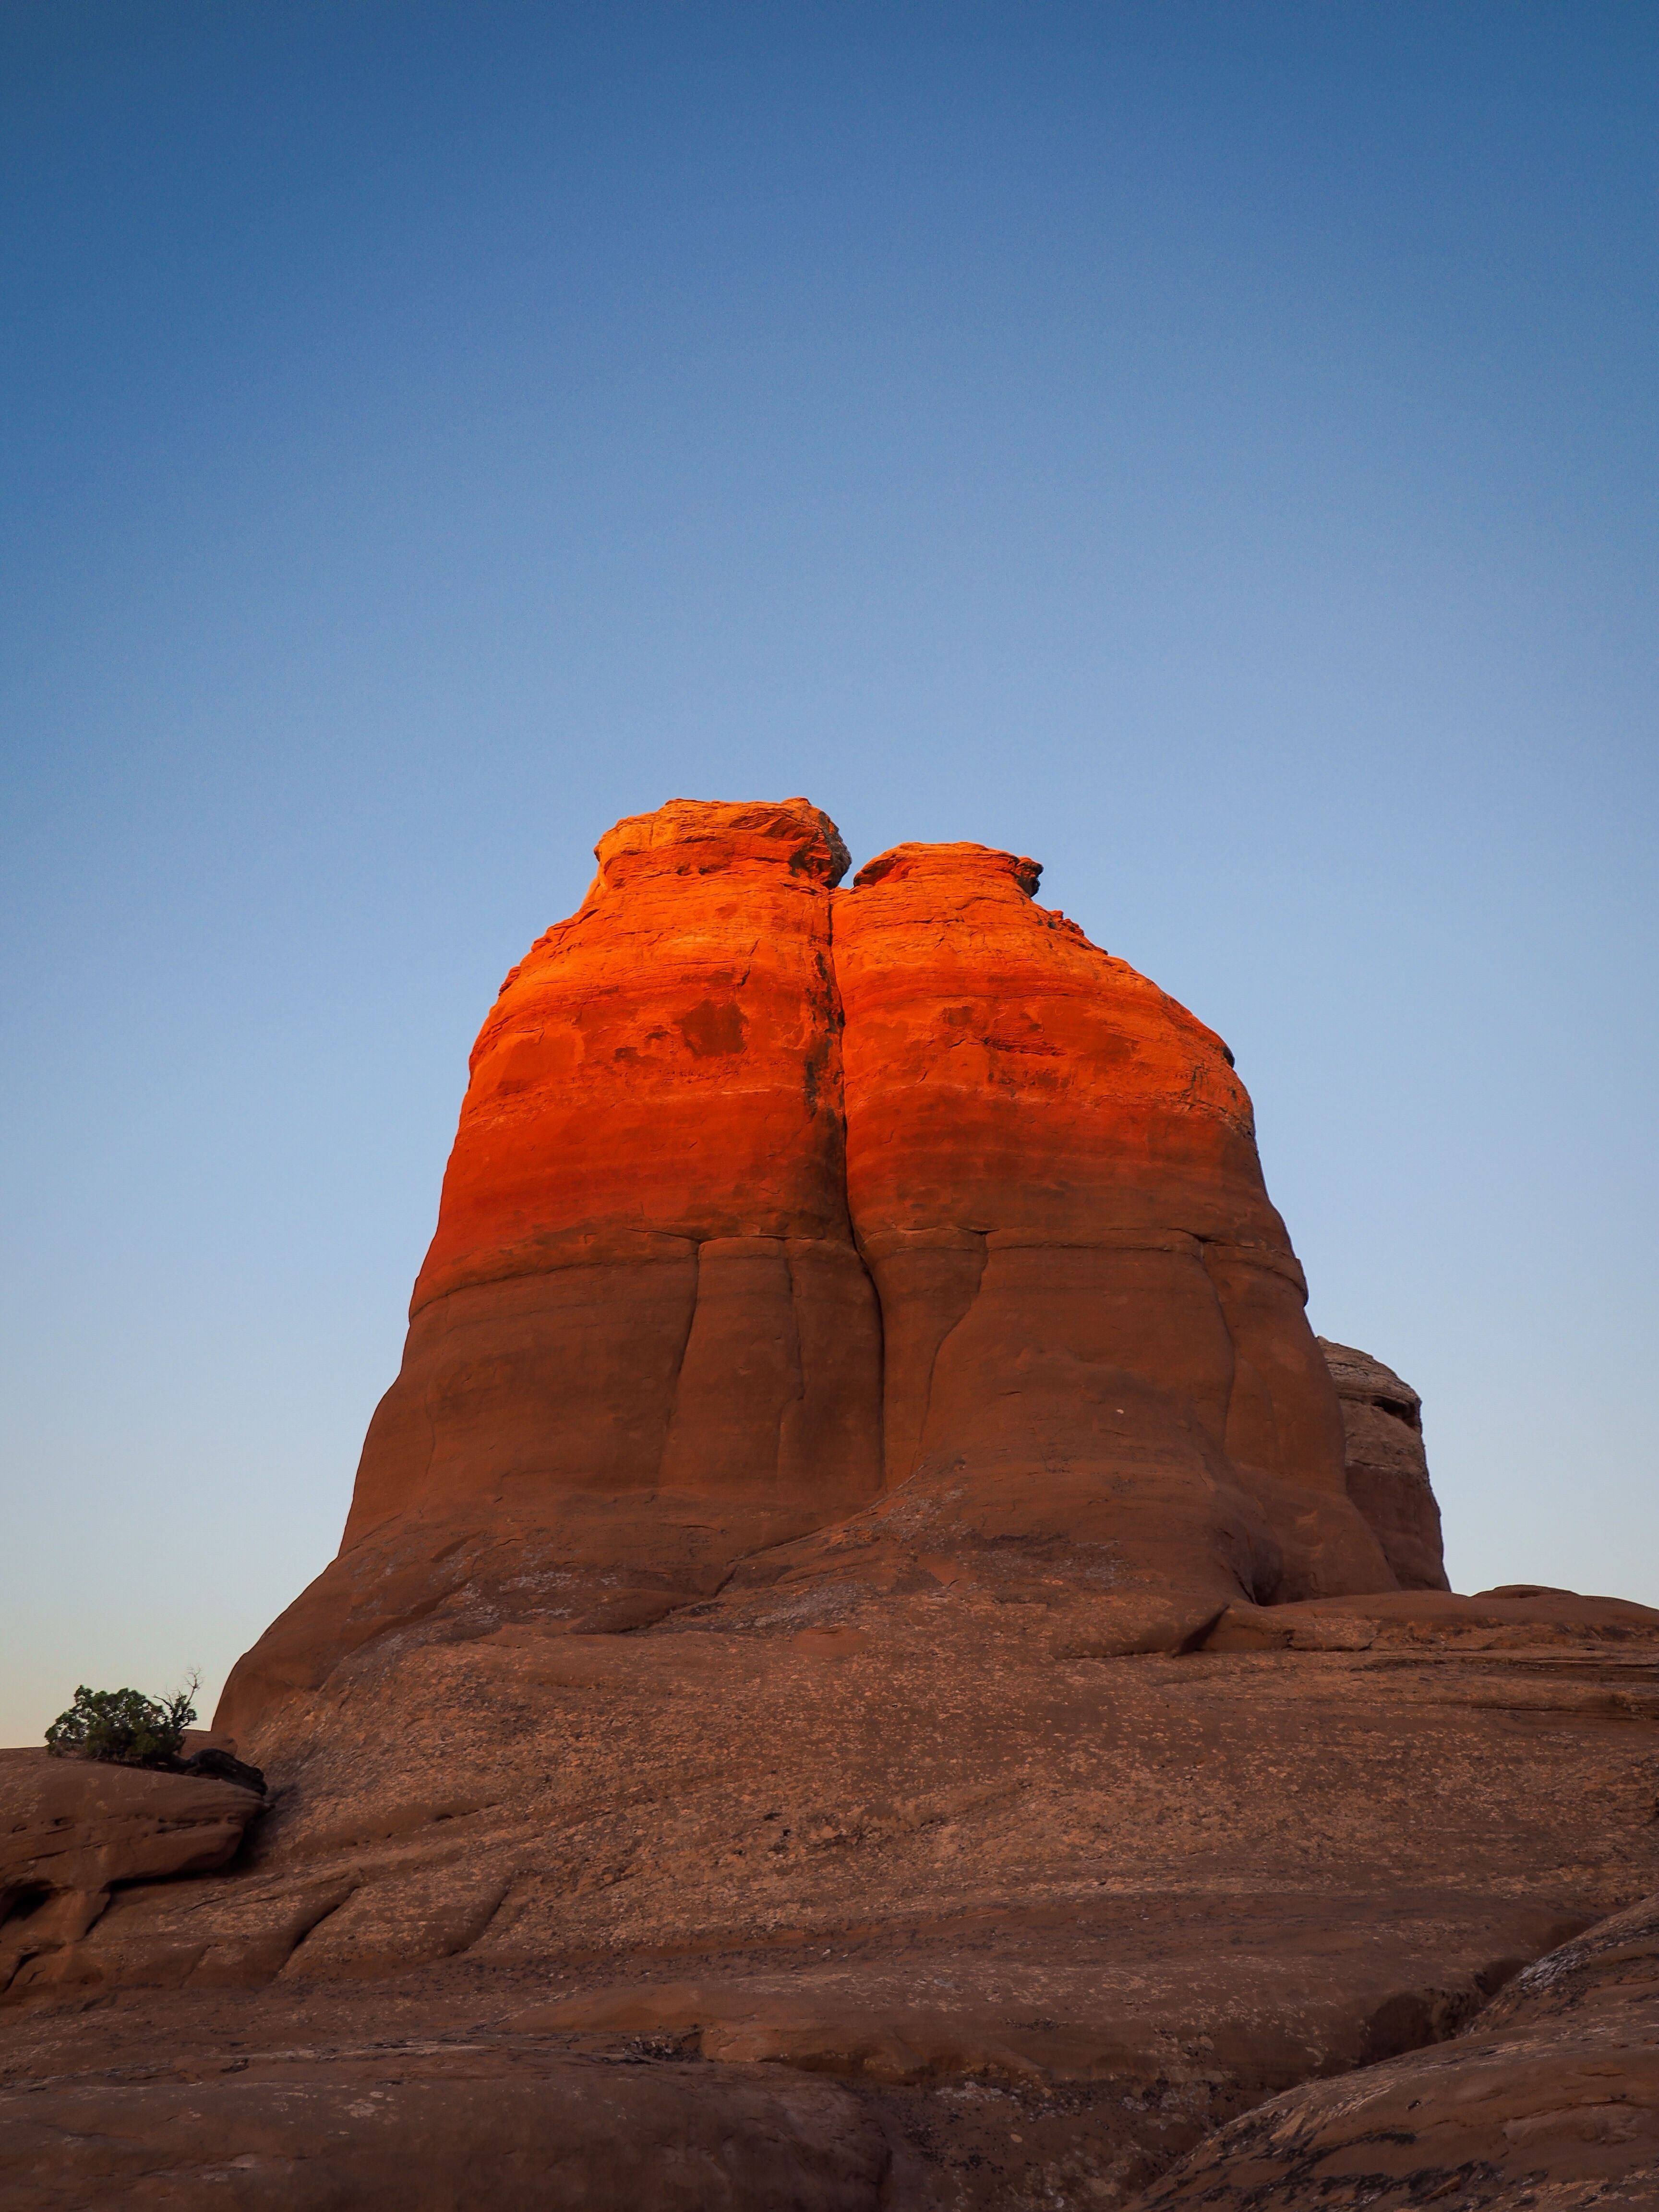 The days last glowing ember in the desert - Arches NP [OC] [3456 x ...